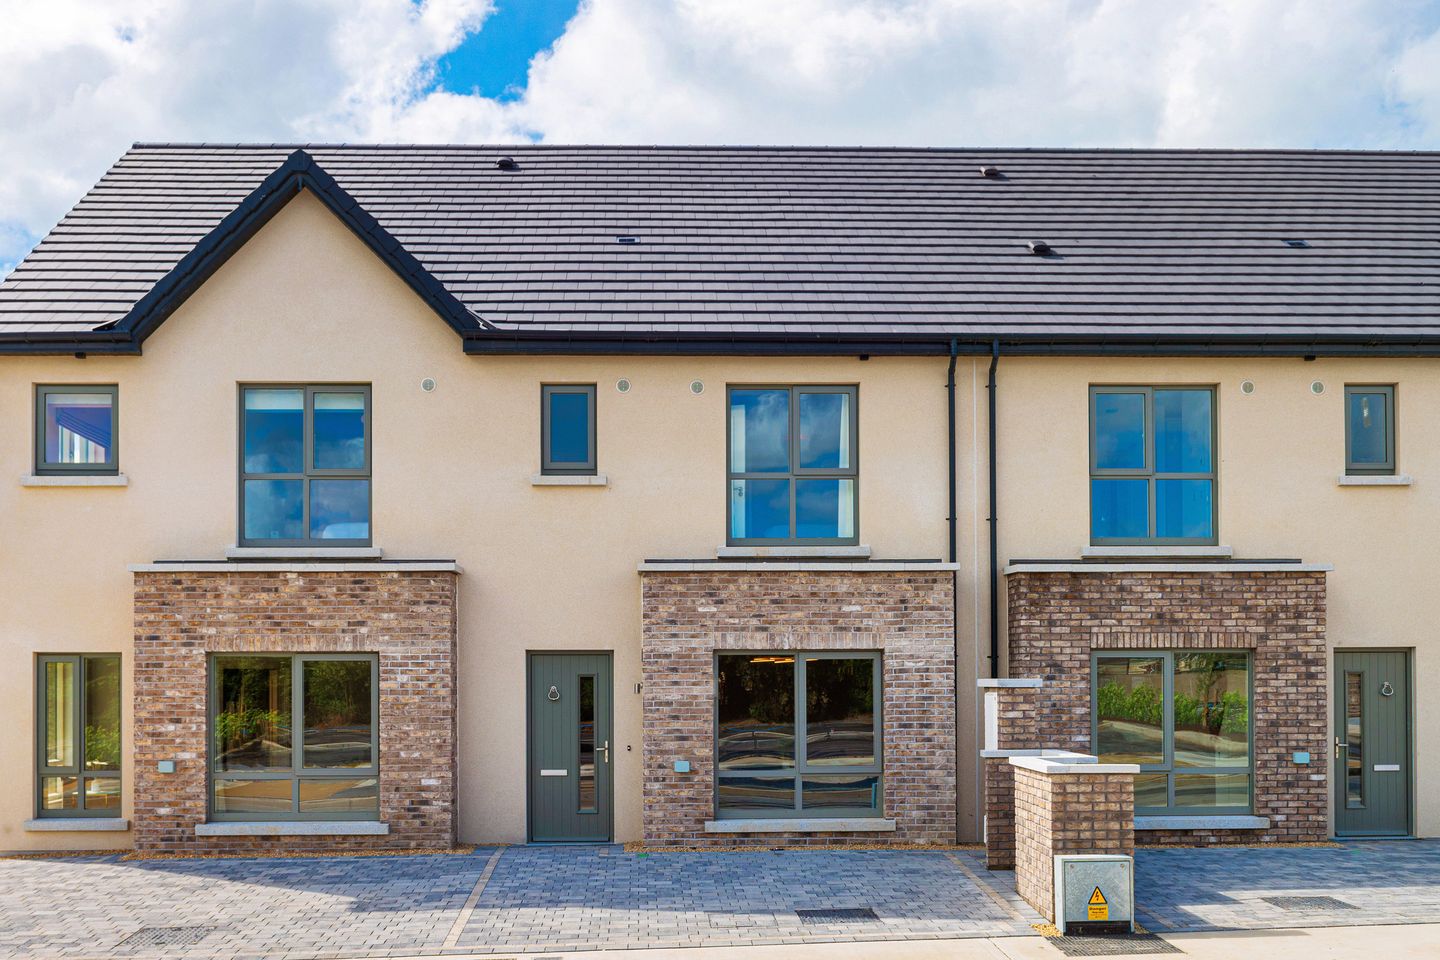 3 Bedroom Mid Terrace Plus Study - B1, The Bawnogues, The Bawnogues, Kilcock, Co. Kildare